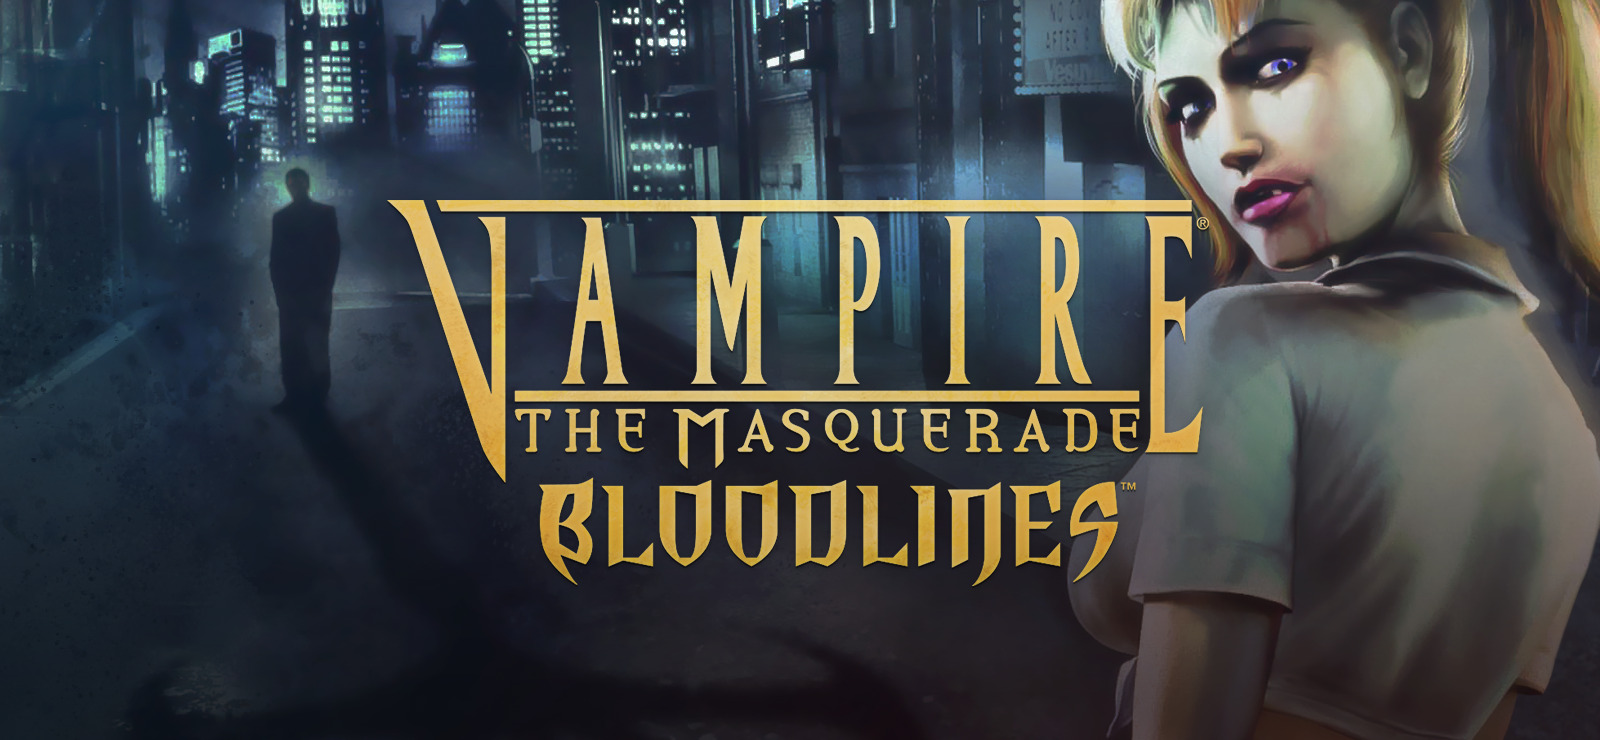 Vampire The Masquerade: Bloodlines 2 First Blood Edition